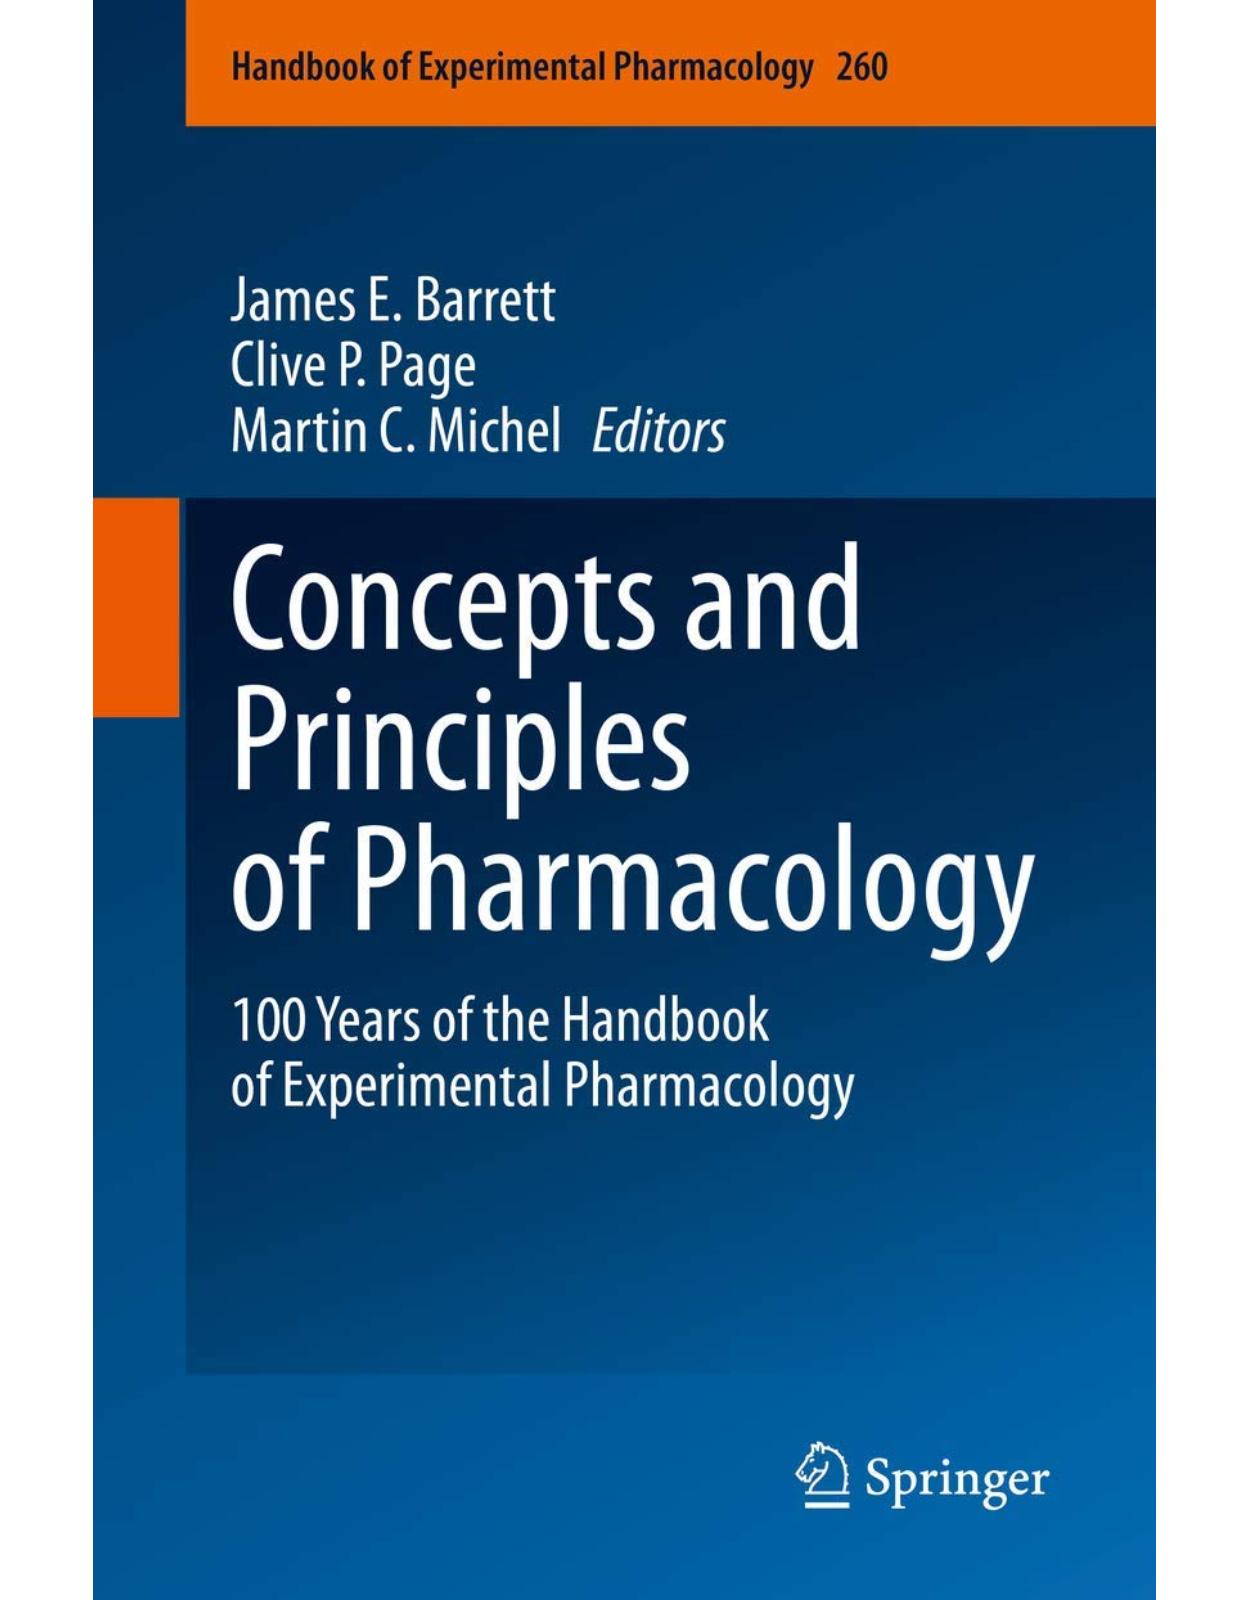 Concepts and Principles of Pharmacology: 100 Years of the Handbook of Experimental Pharmacology: 260